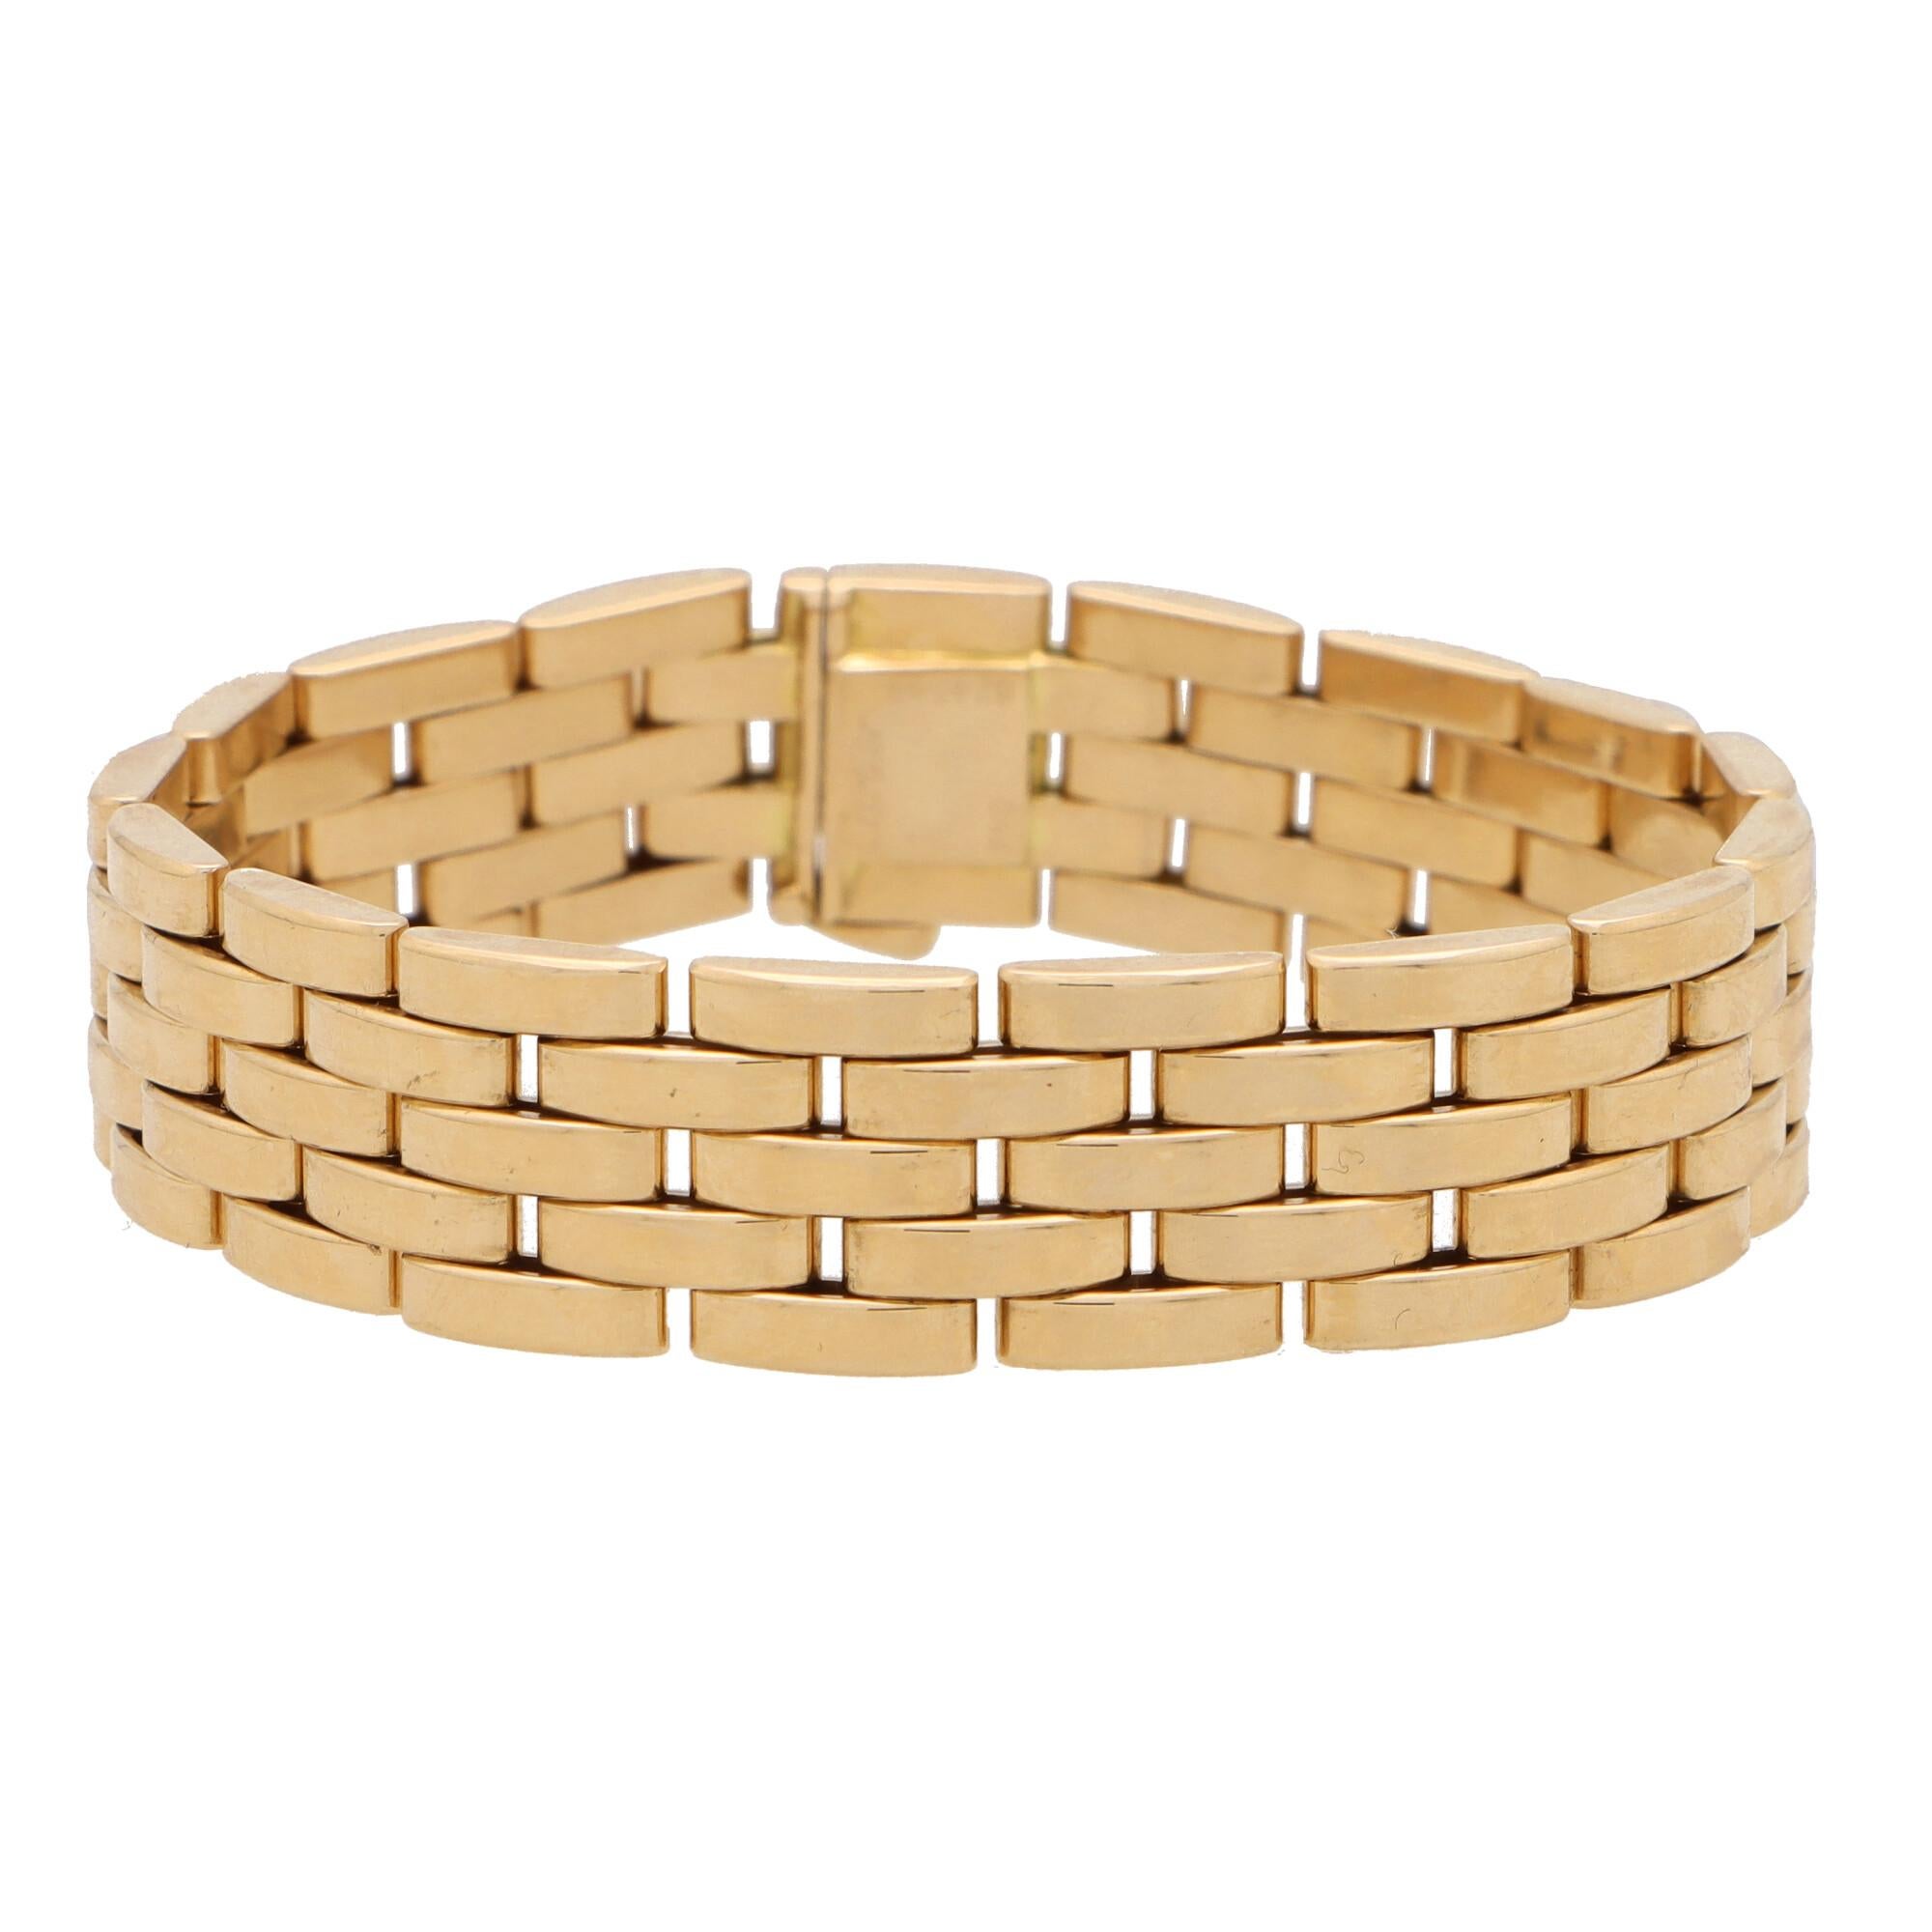 A beautiful vintage Cartier Maillon Panthère bracelet set in solid 18k yellow gold.

The bracelet is composed of exactly 80 solid gold flat links, connected in the iconic Maillon Panthère brick link design. This particular design is the five-row